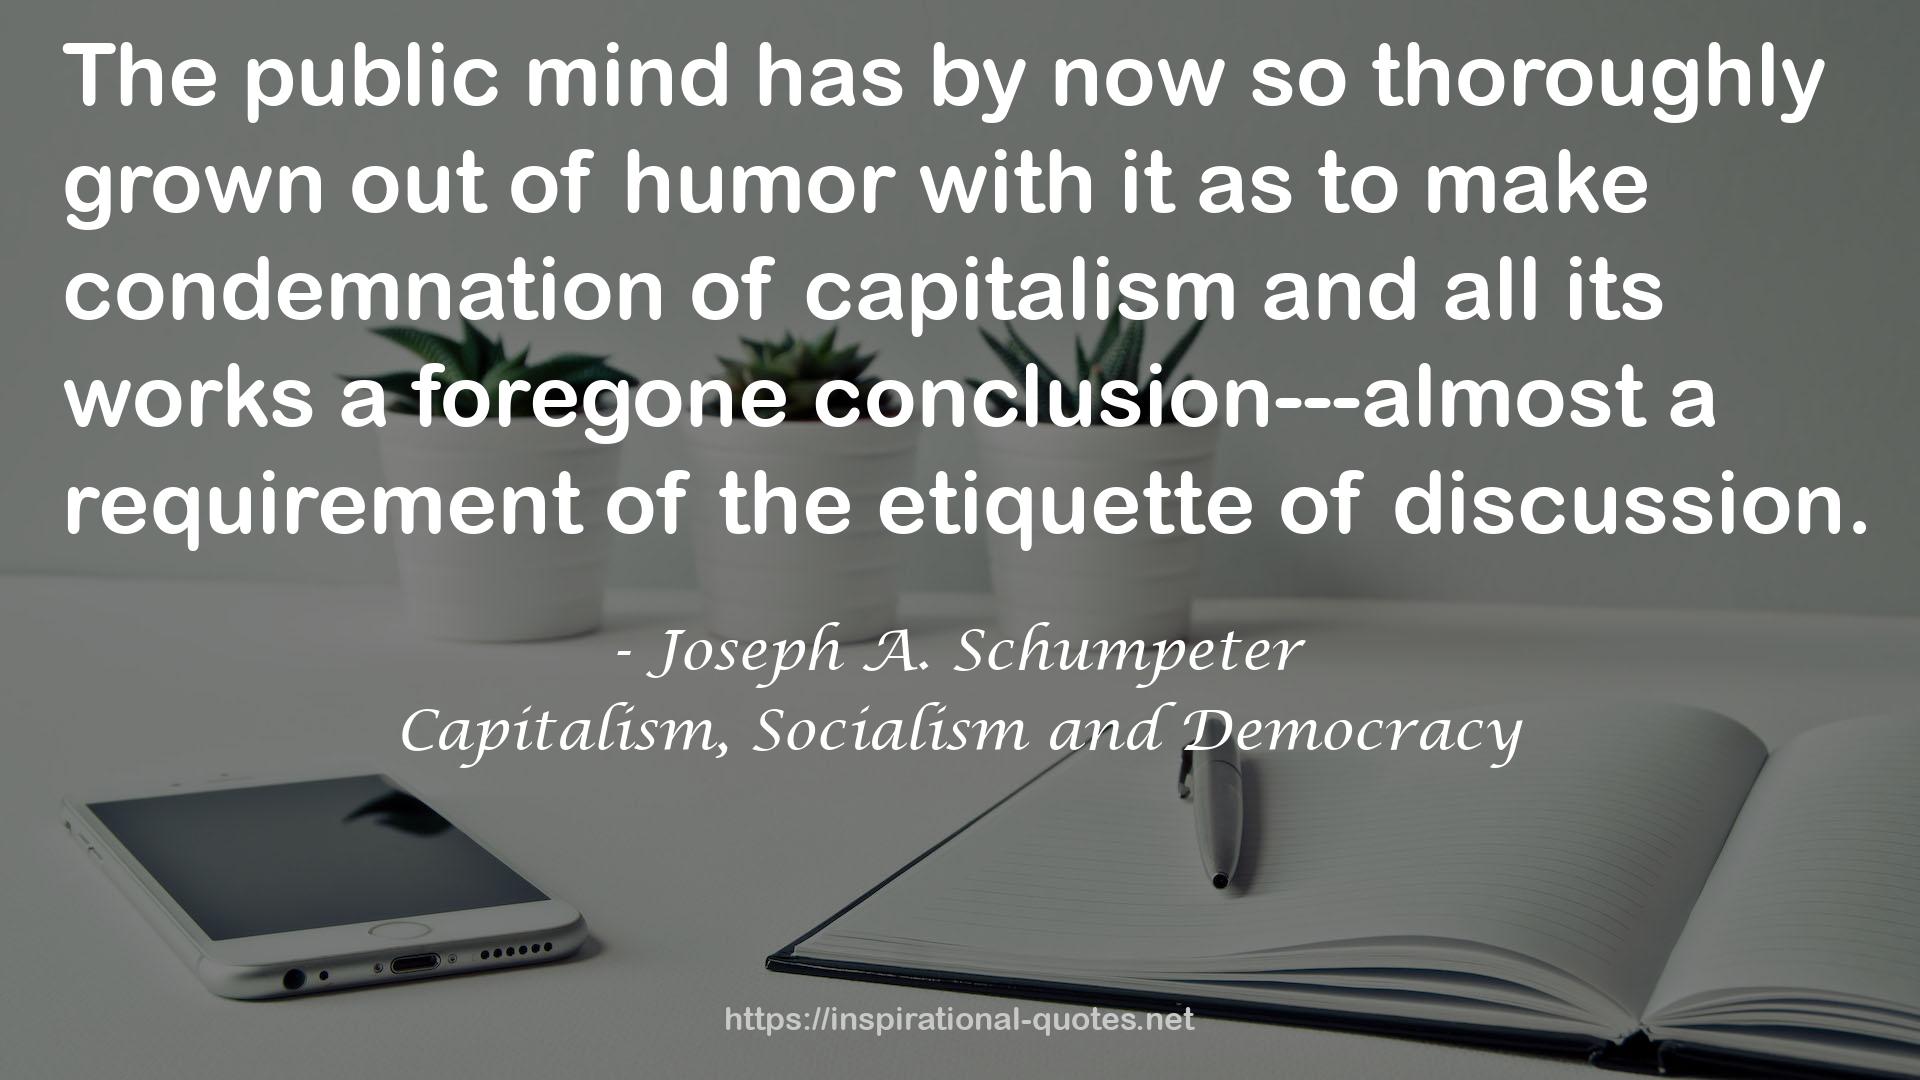 Joseph A. Schumpeter QUOTES